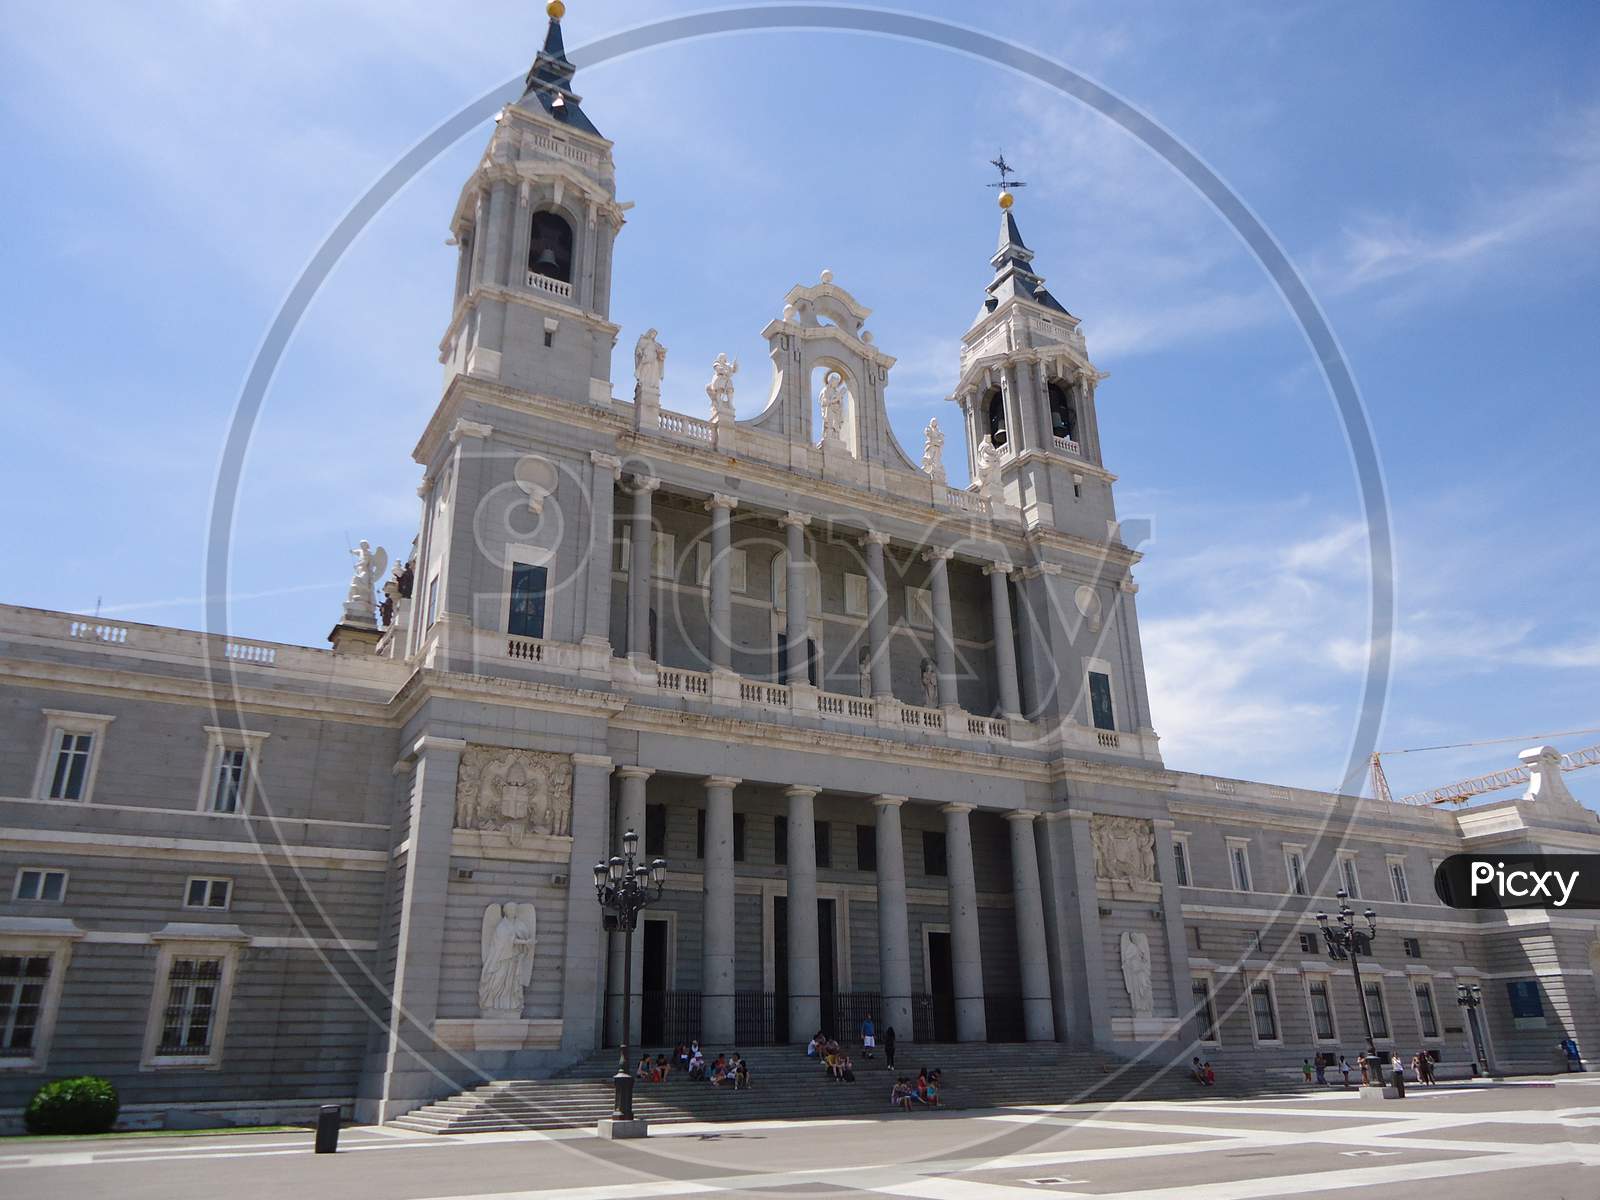 Almudena Cathedral Is A Catholic Church In Madrid, Spain. It Is The Seat Of The Roman Catholic Archdiocese Of Madrid.